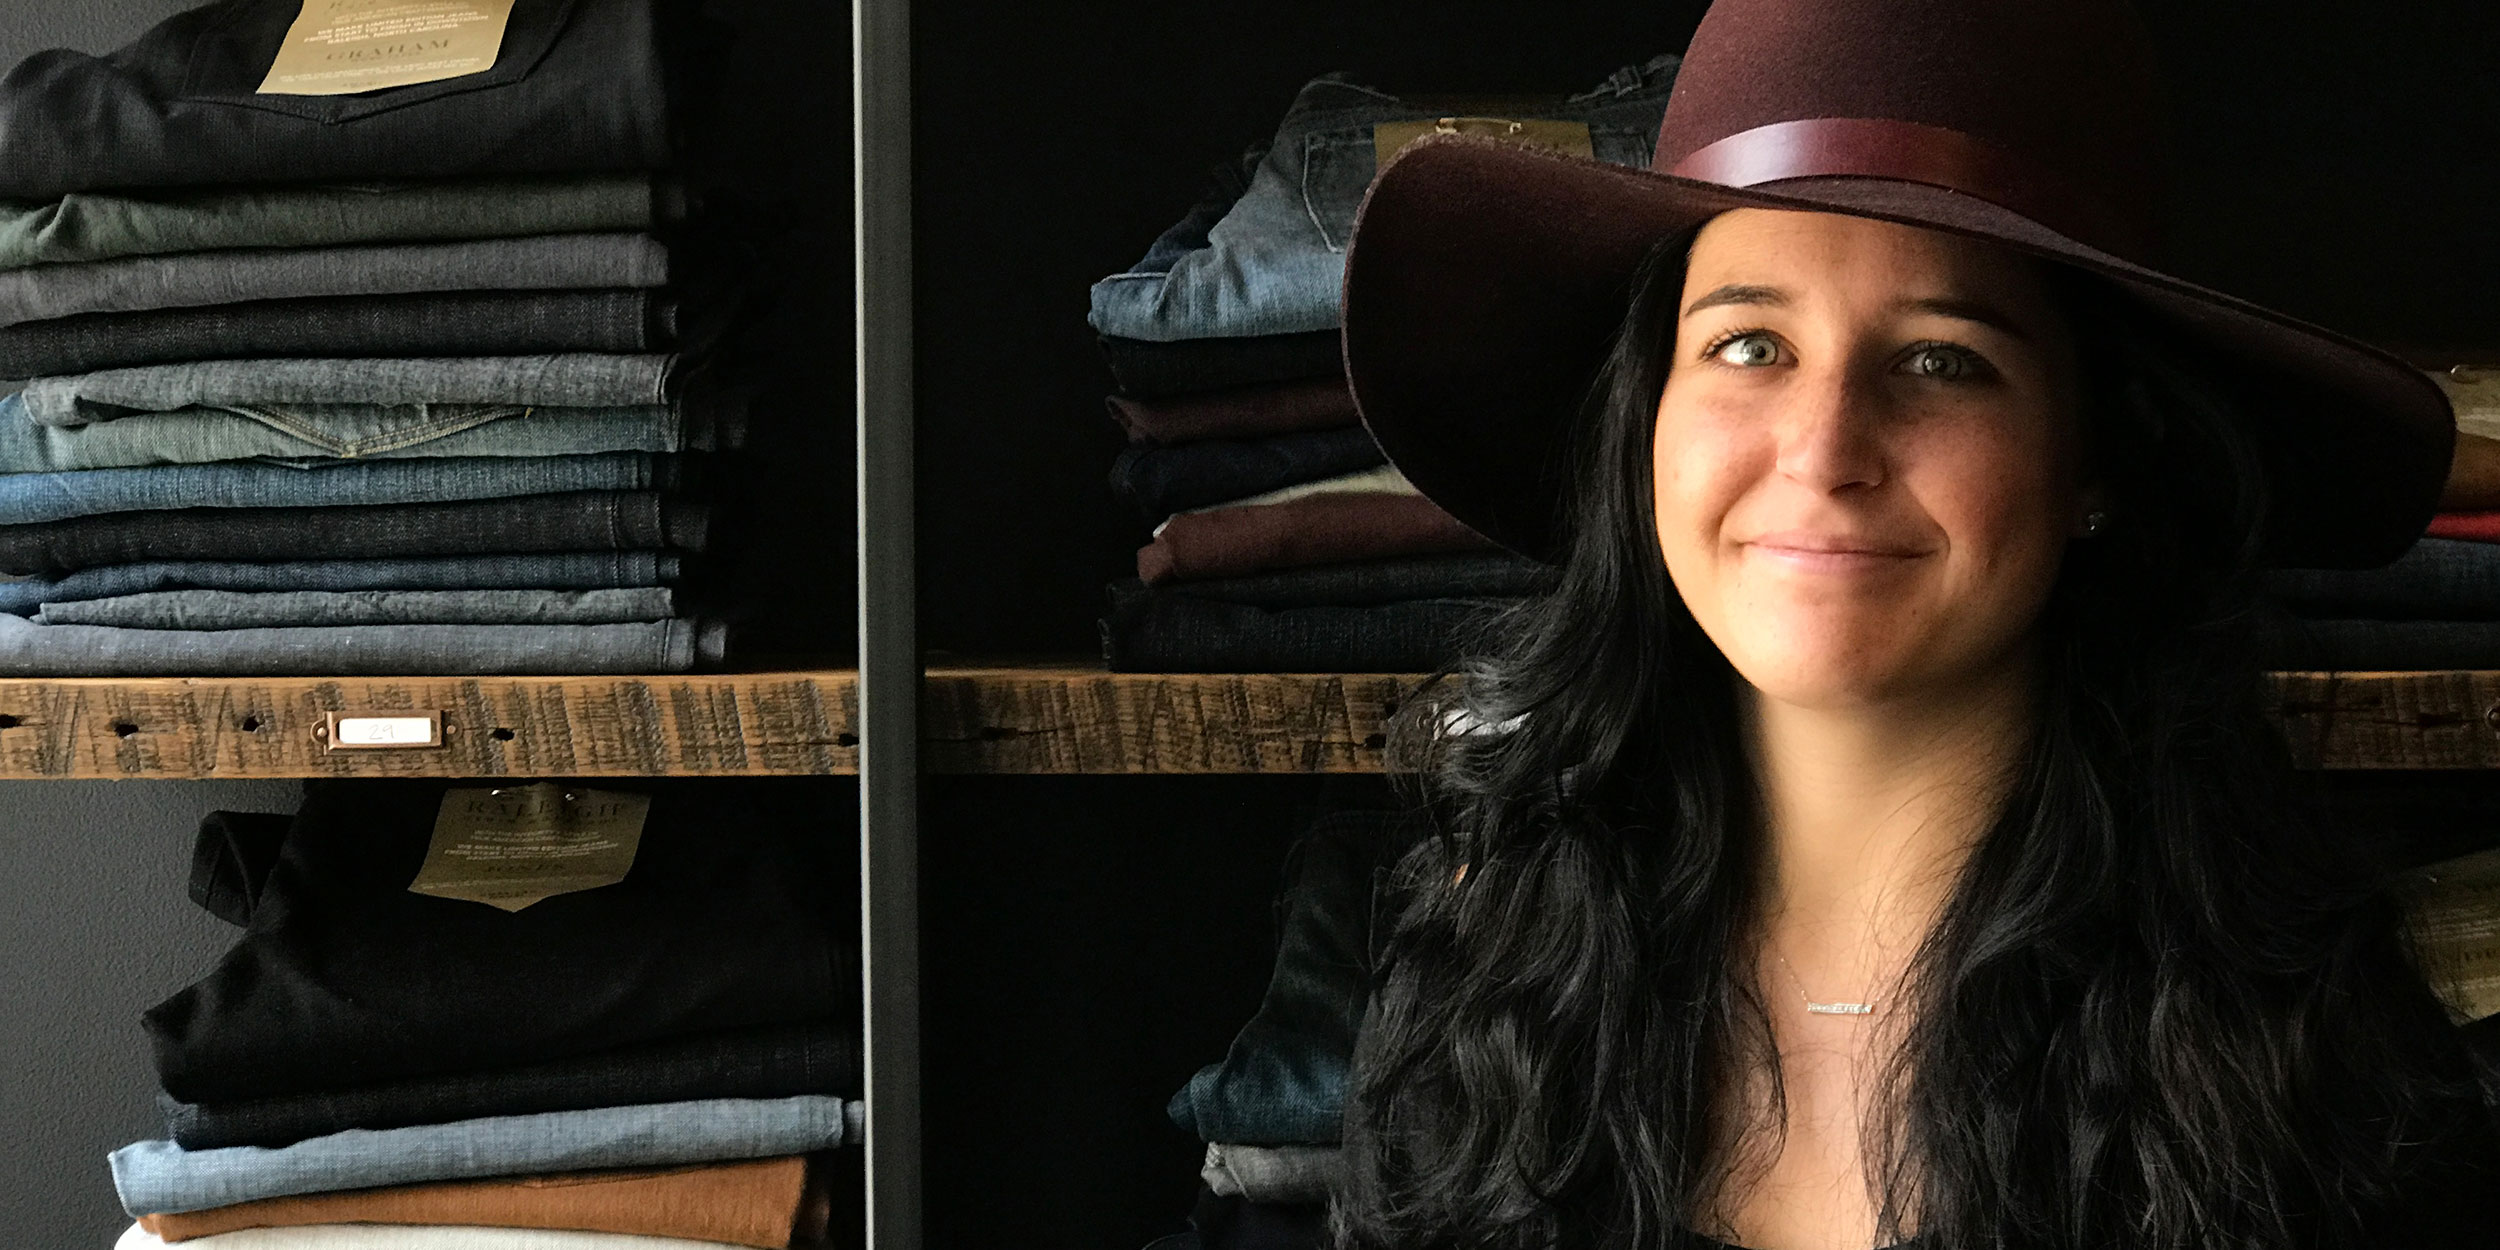 A young woman wearing a large brimmed hat in front of shelves filled with folded jeans in Wake County